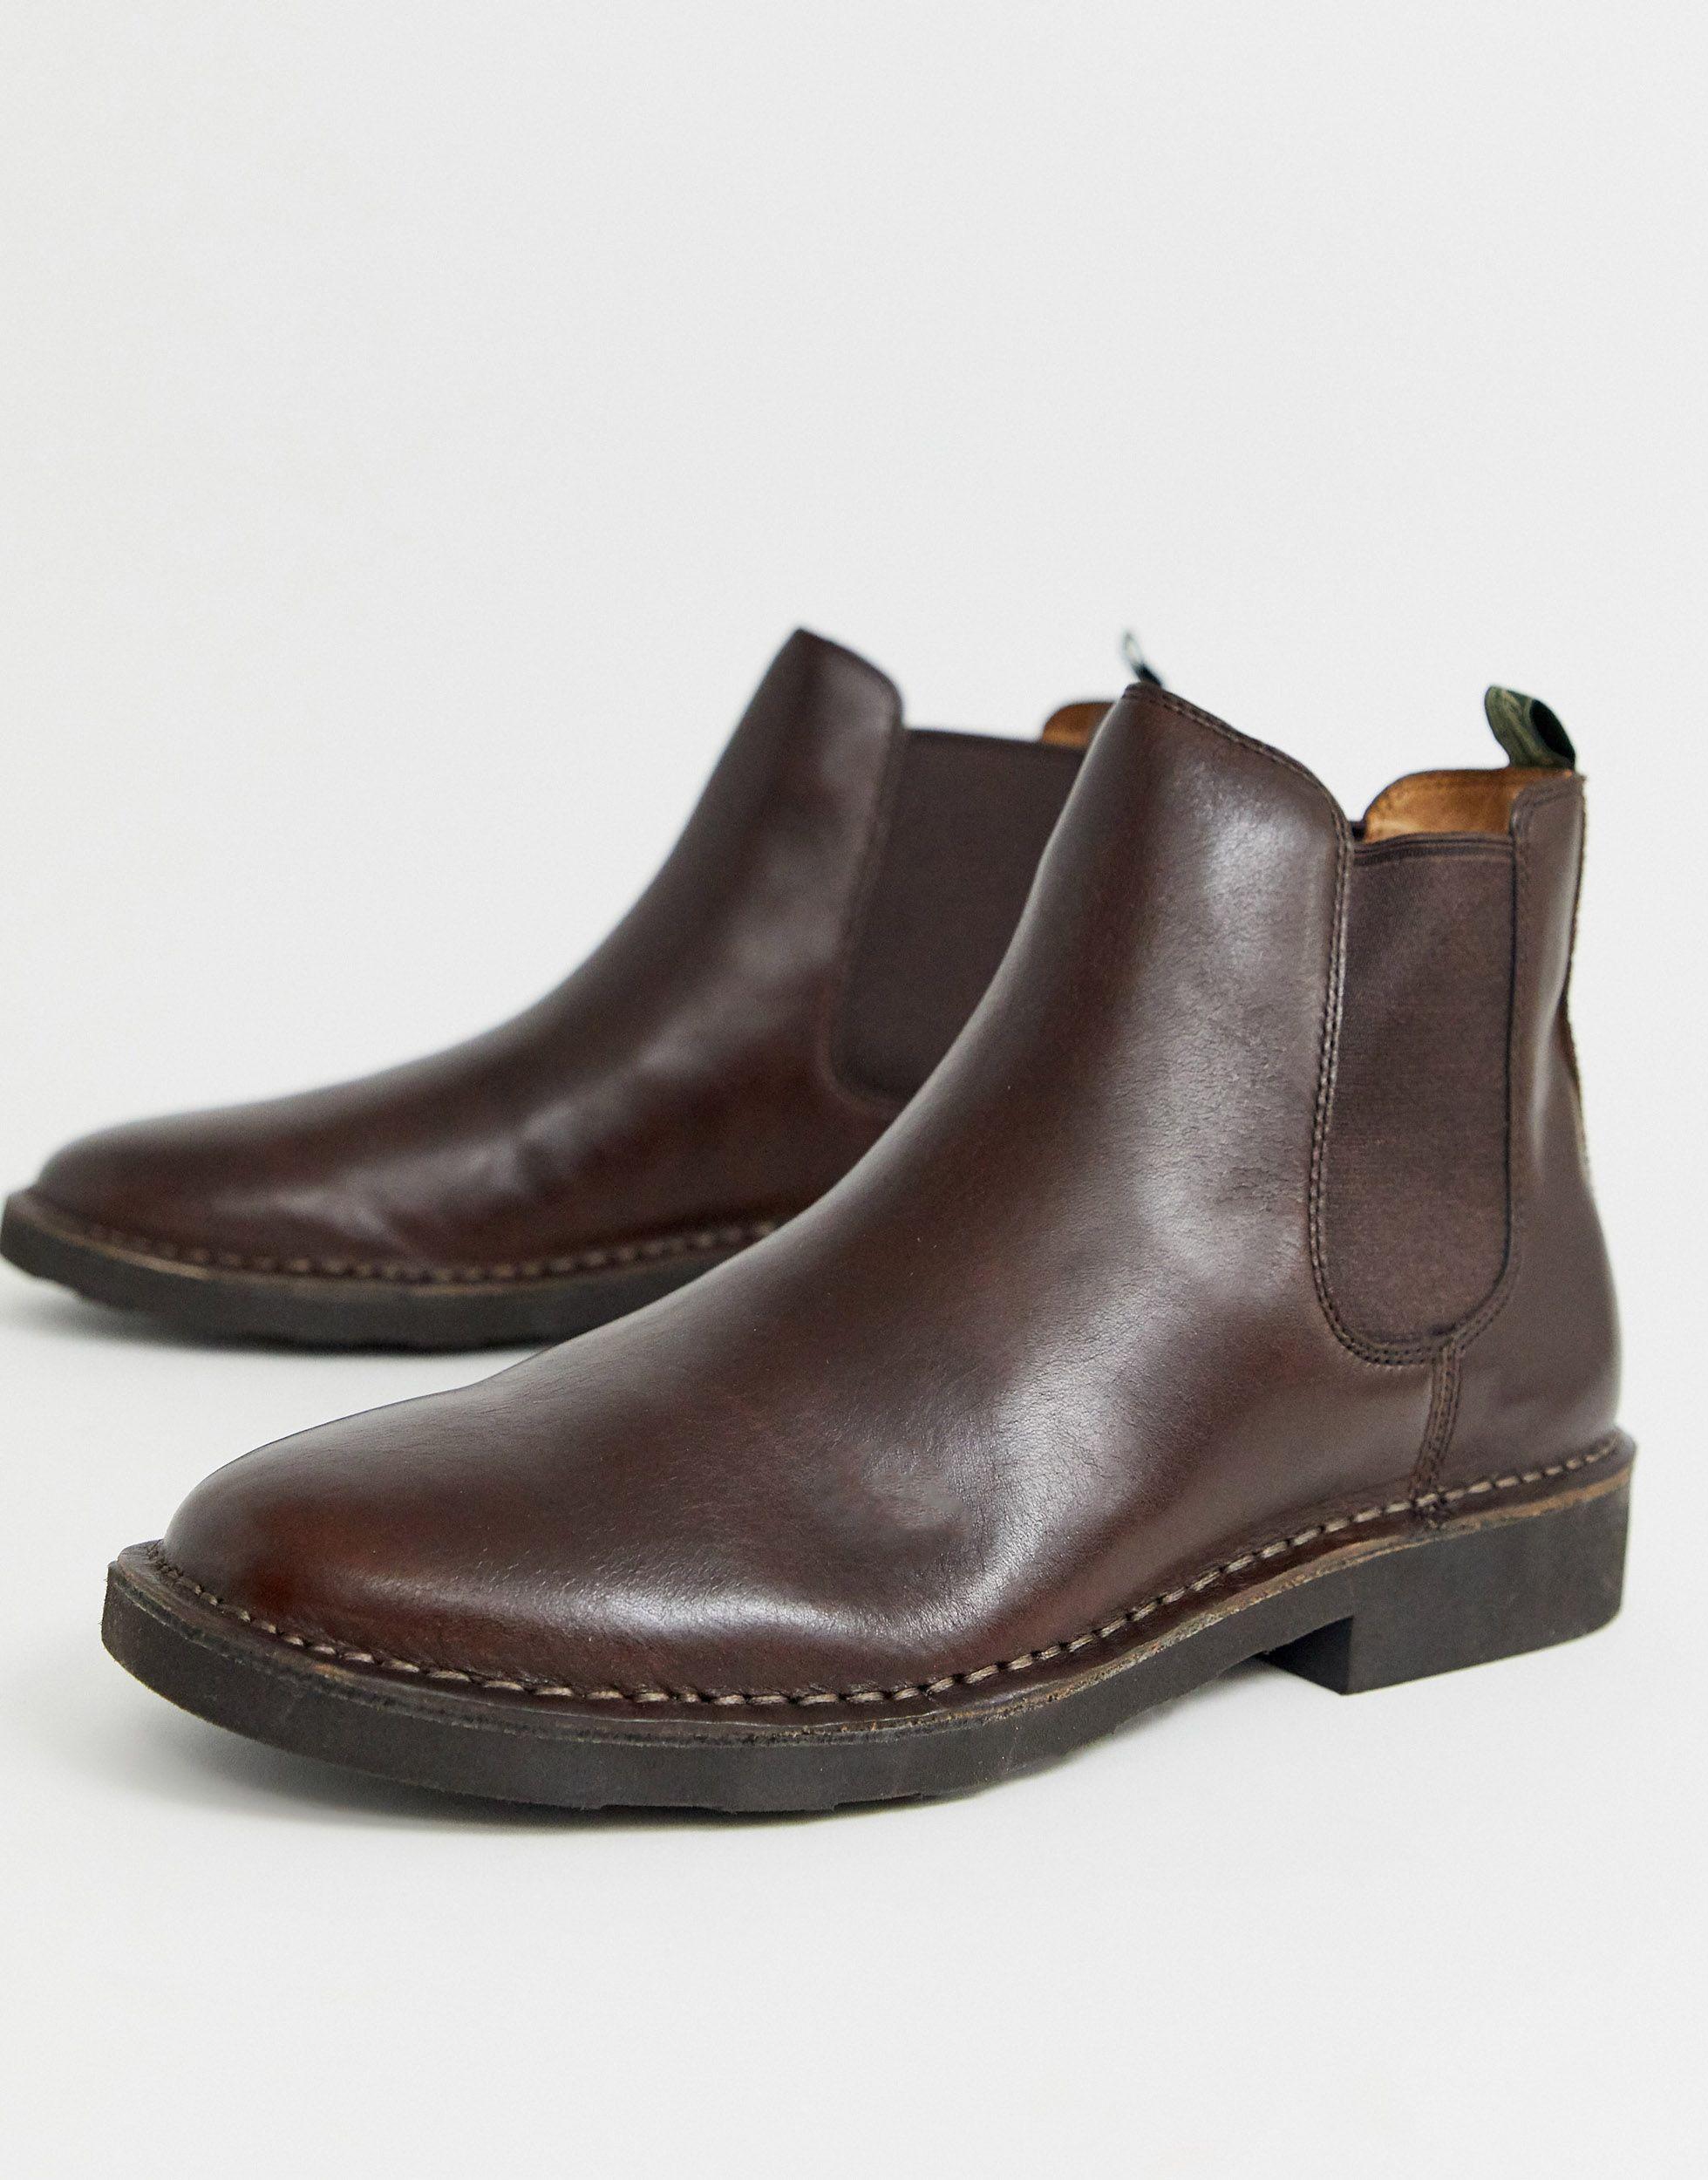 Polo Ralph Lauren Talan Leather Chelsea Boot in Brown for Men - Lyst